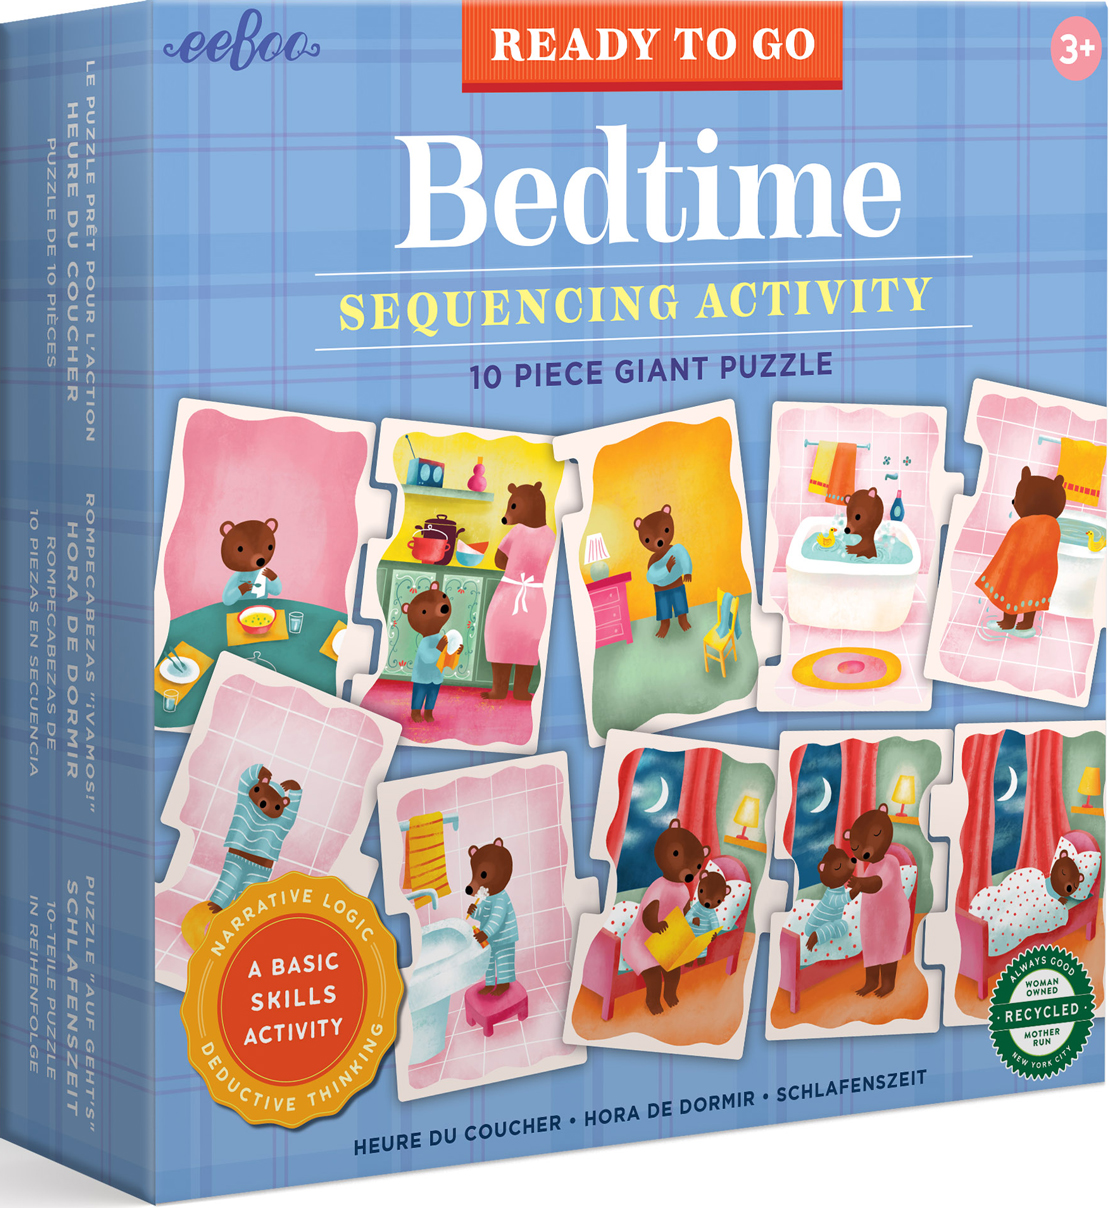 Ready to Go Puzzle - Bedtime Educational Jigsaw Puzzle